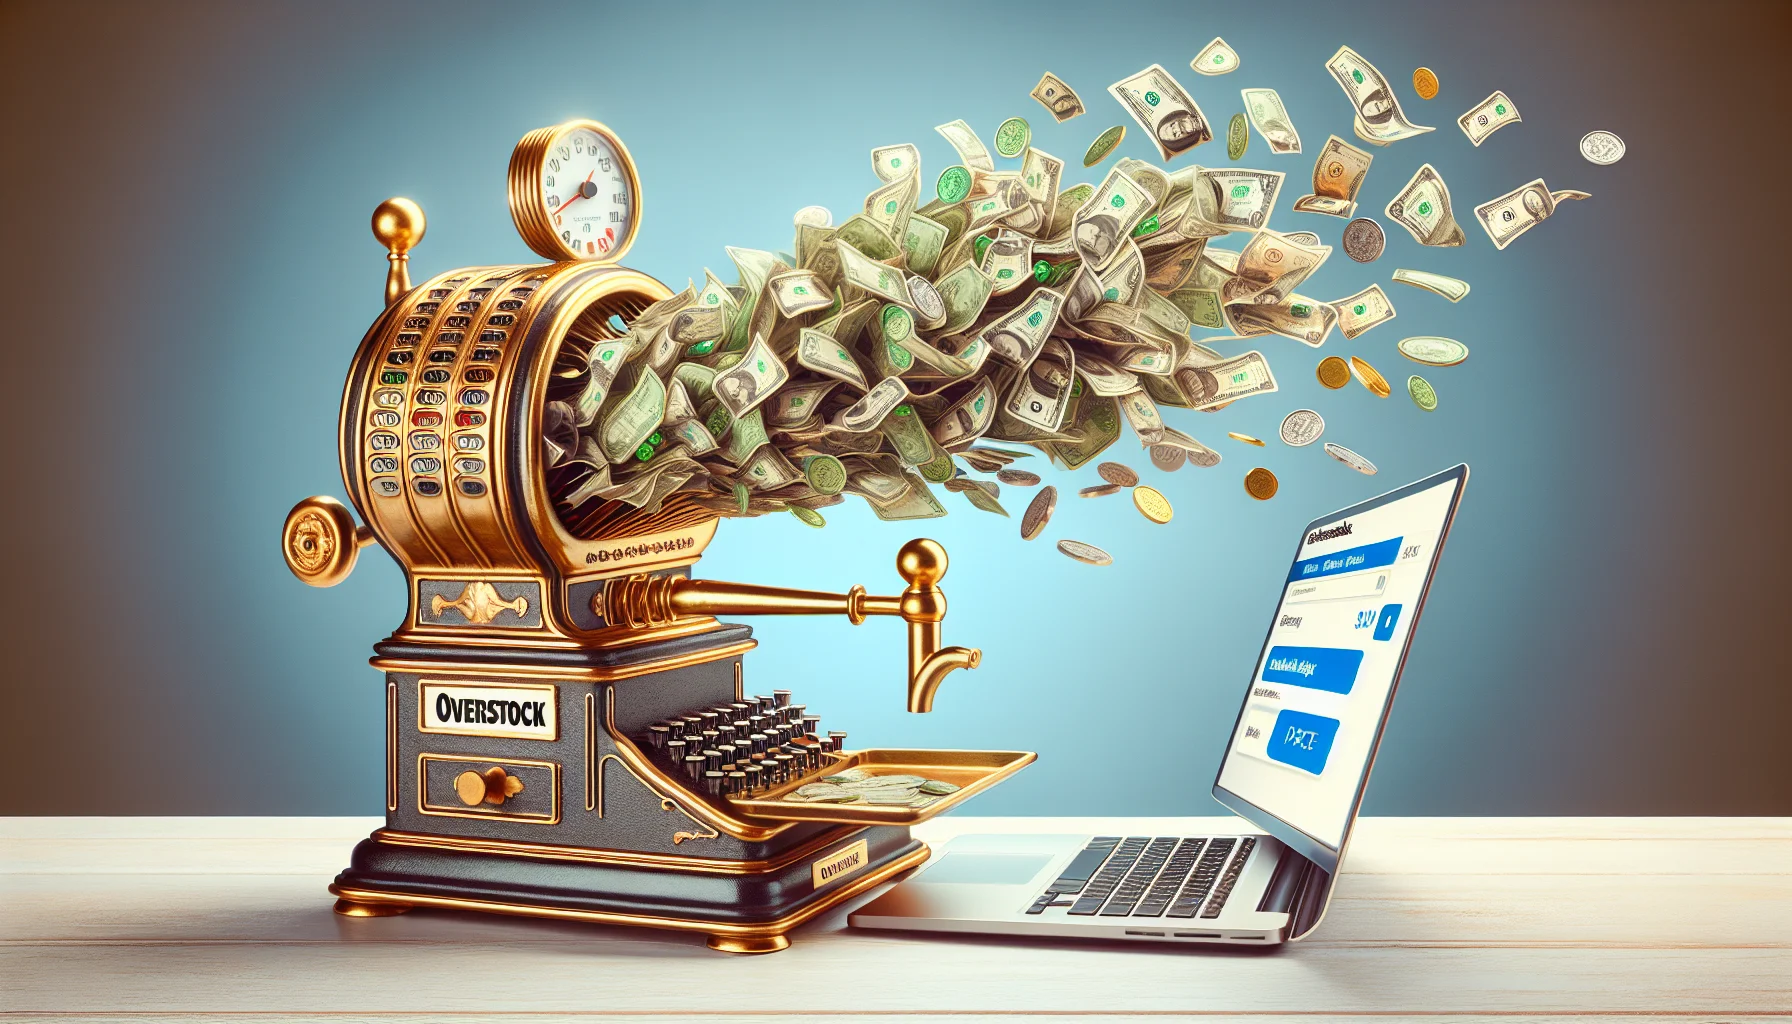 Create a whimsical yet realistic image that highlights the theme of the Overstock affiliate program. Picture it in a scenario that is enticing and strongly related to making money online. Imagine this with a playful twist: visualize an old-fashioned, brass cash register. This register is bursting open, spewing out a stream of digital coins and banknotes into a laptop screen. The laptop screen shows the logo of the affiliate program. This fantastical conversion of physical money into digital form symbolizes the earning potential of participating in online affiliate programs. Please refrain from including any real persons or copyrighted symbols, and keep the tone light and fun.